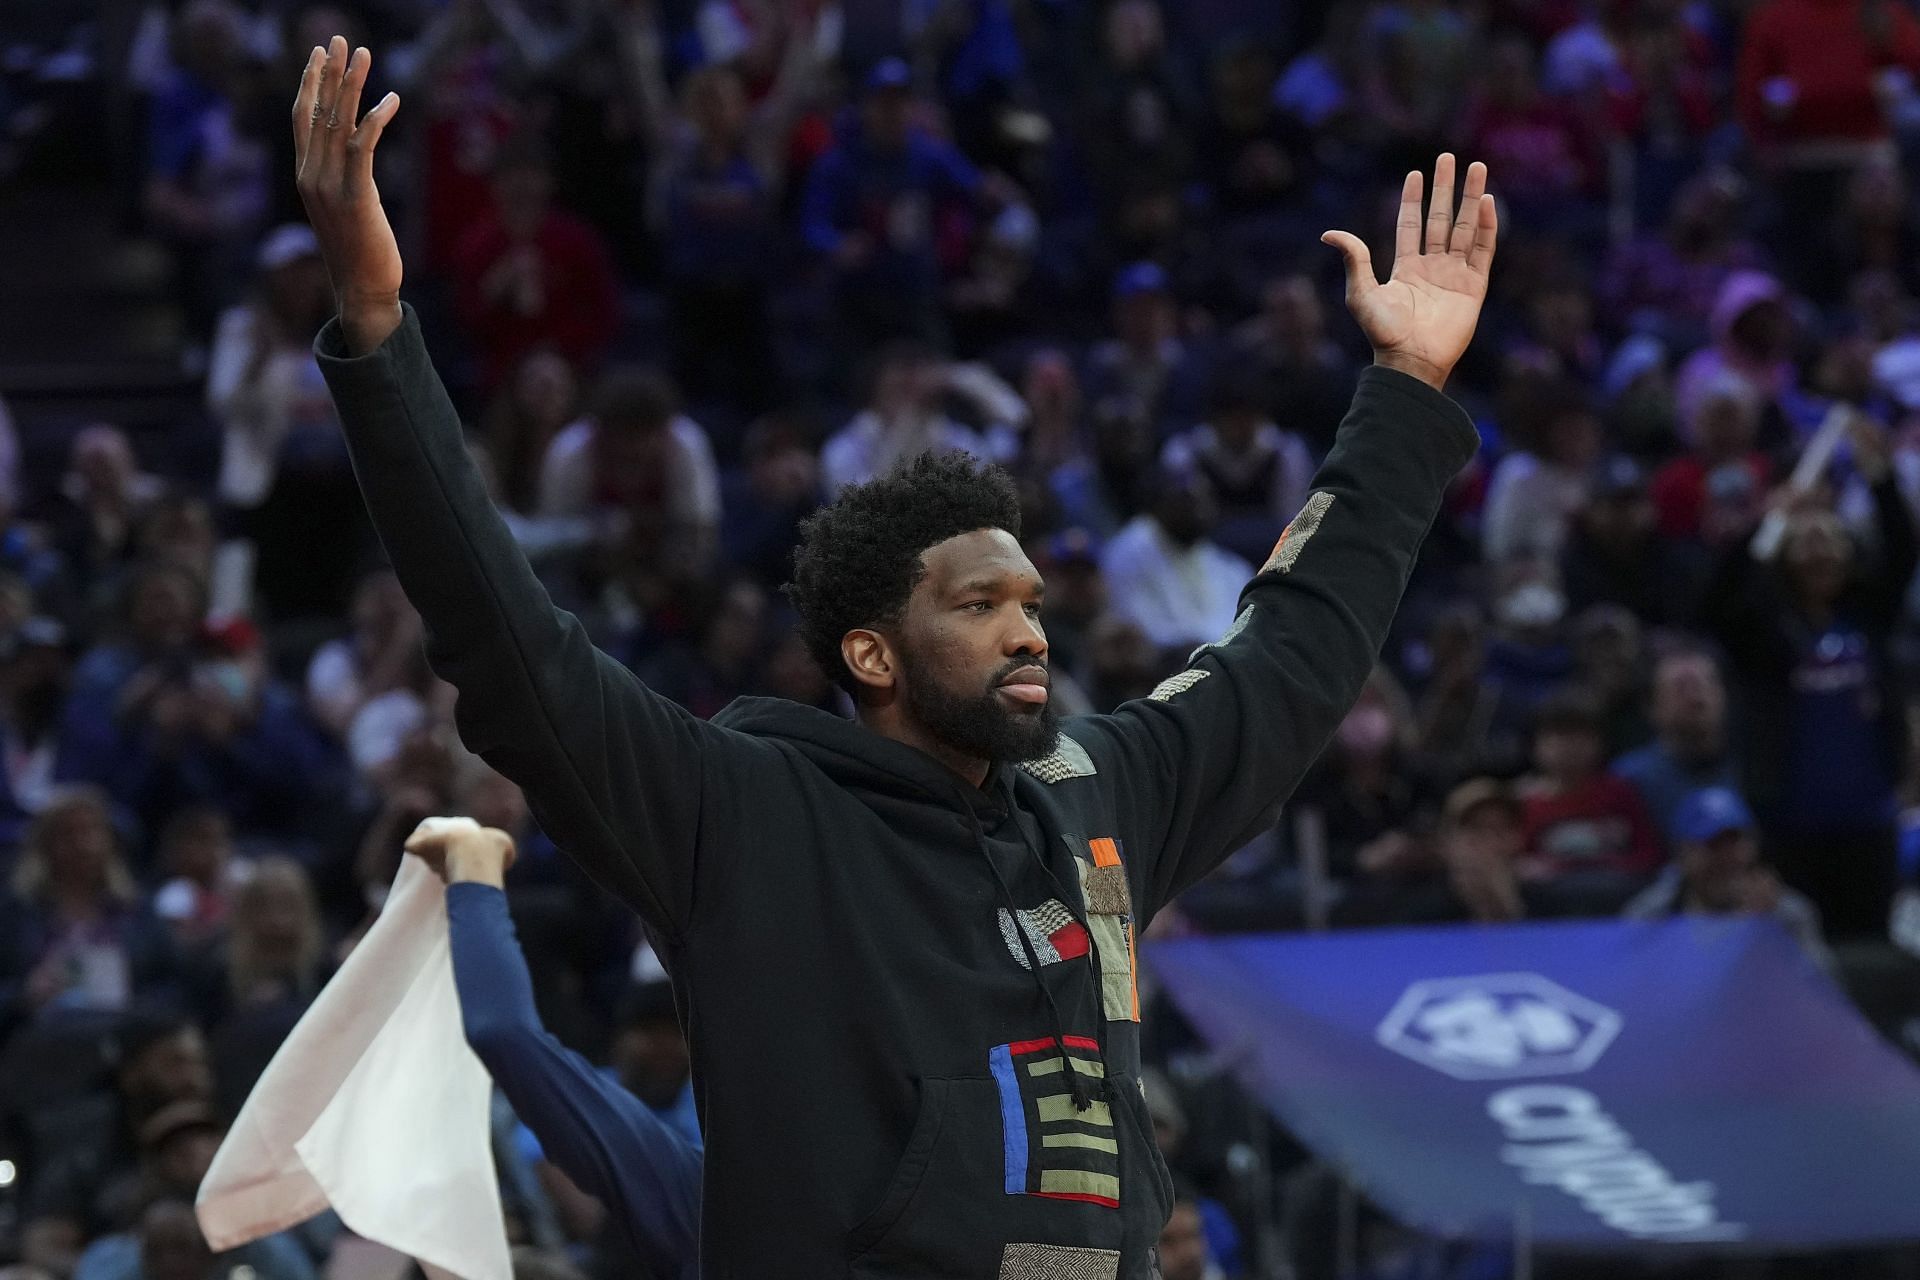 Joel Embiid #21 of the Philadelphia 76ers reacts from the bench against the Detroit Pistons in the second half at the Wells Fargo Center on April 10, 2022 in Philadelphia, Pennsylvania